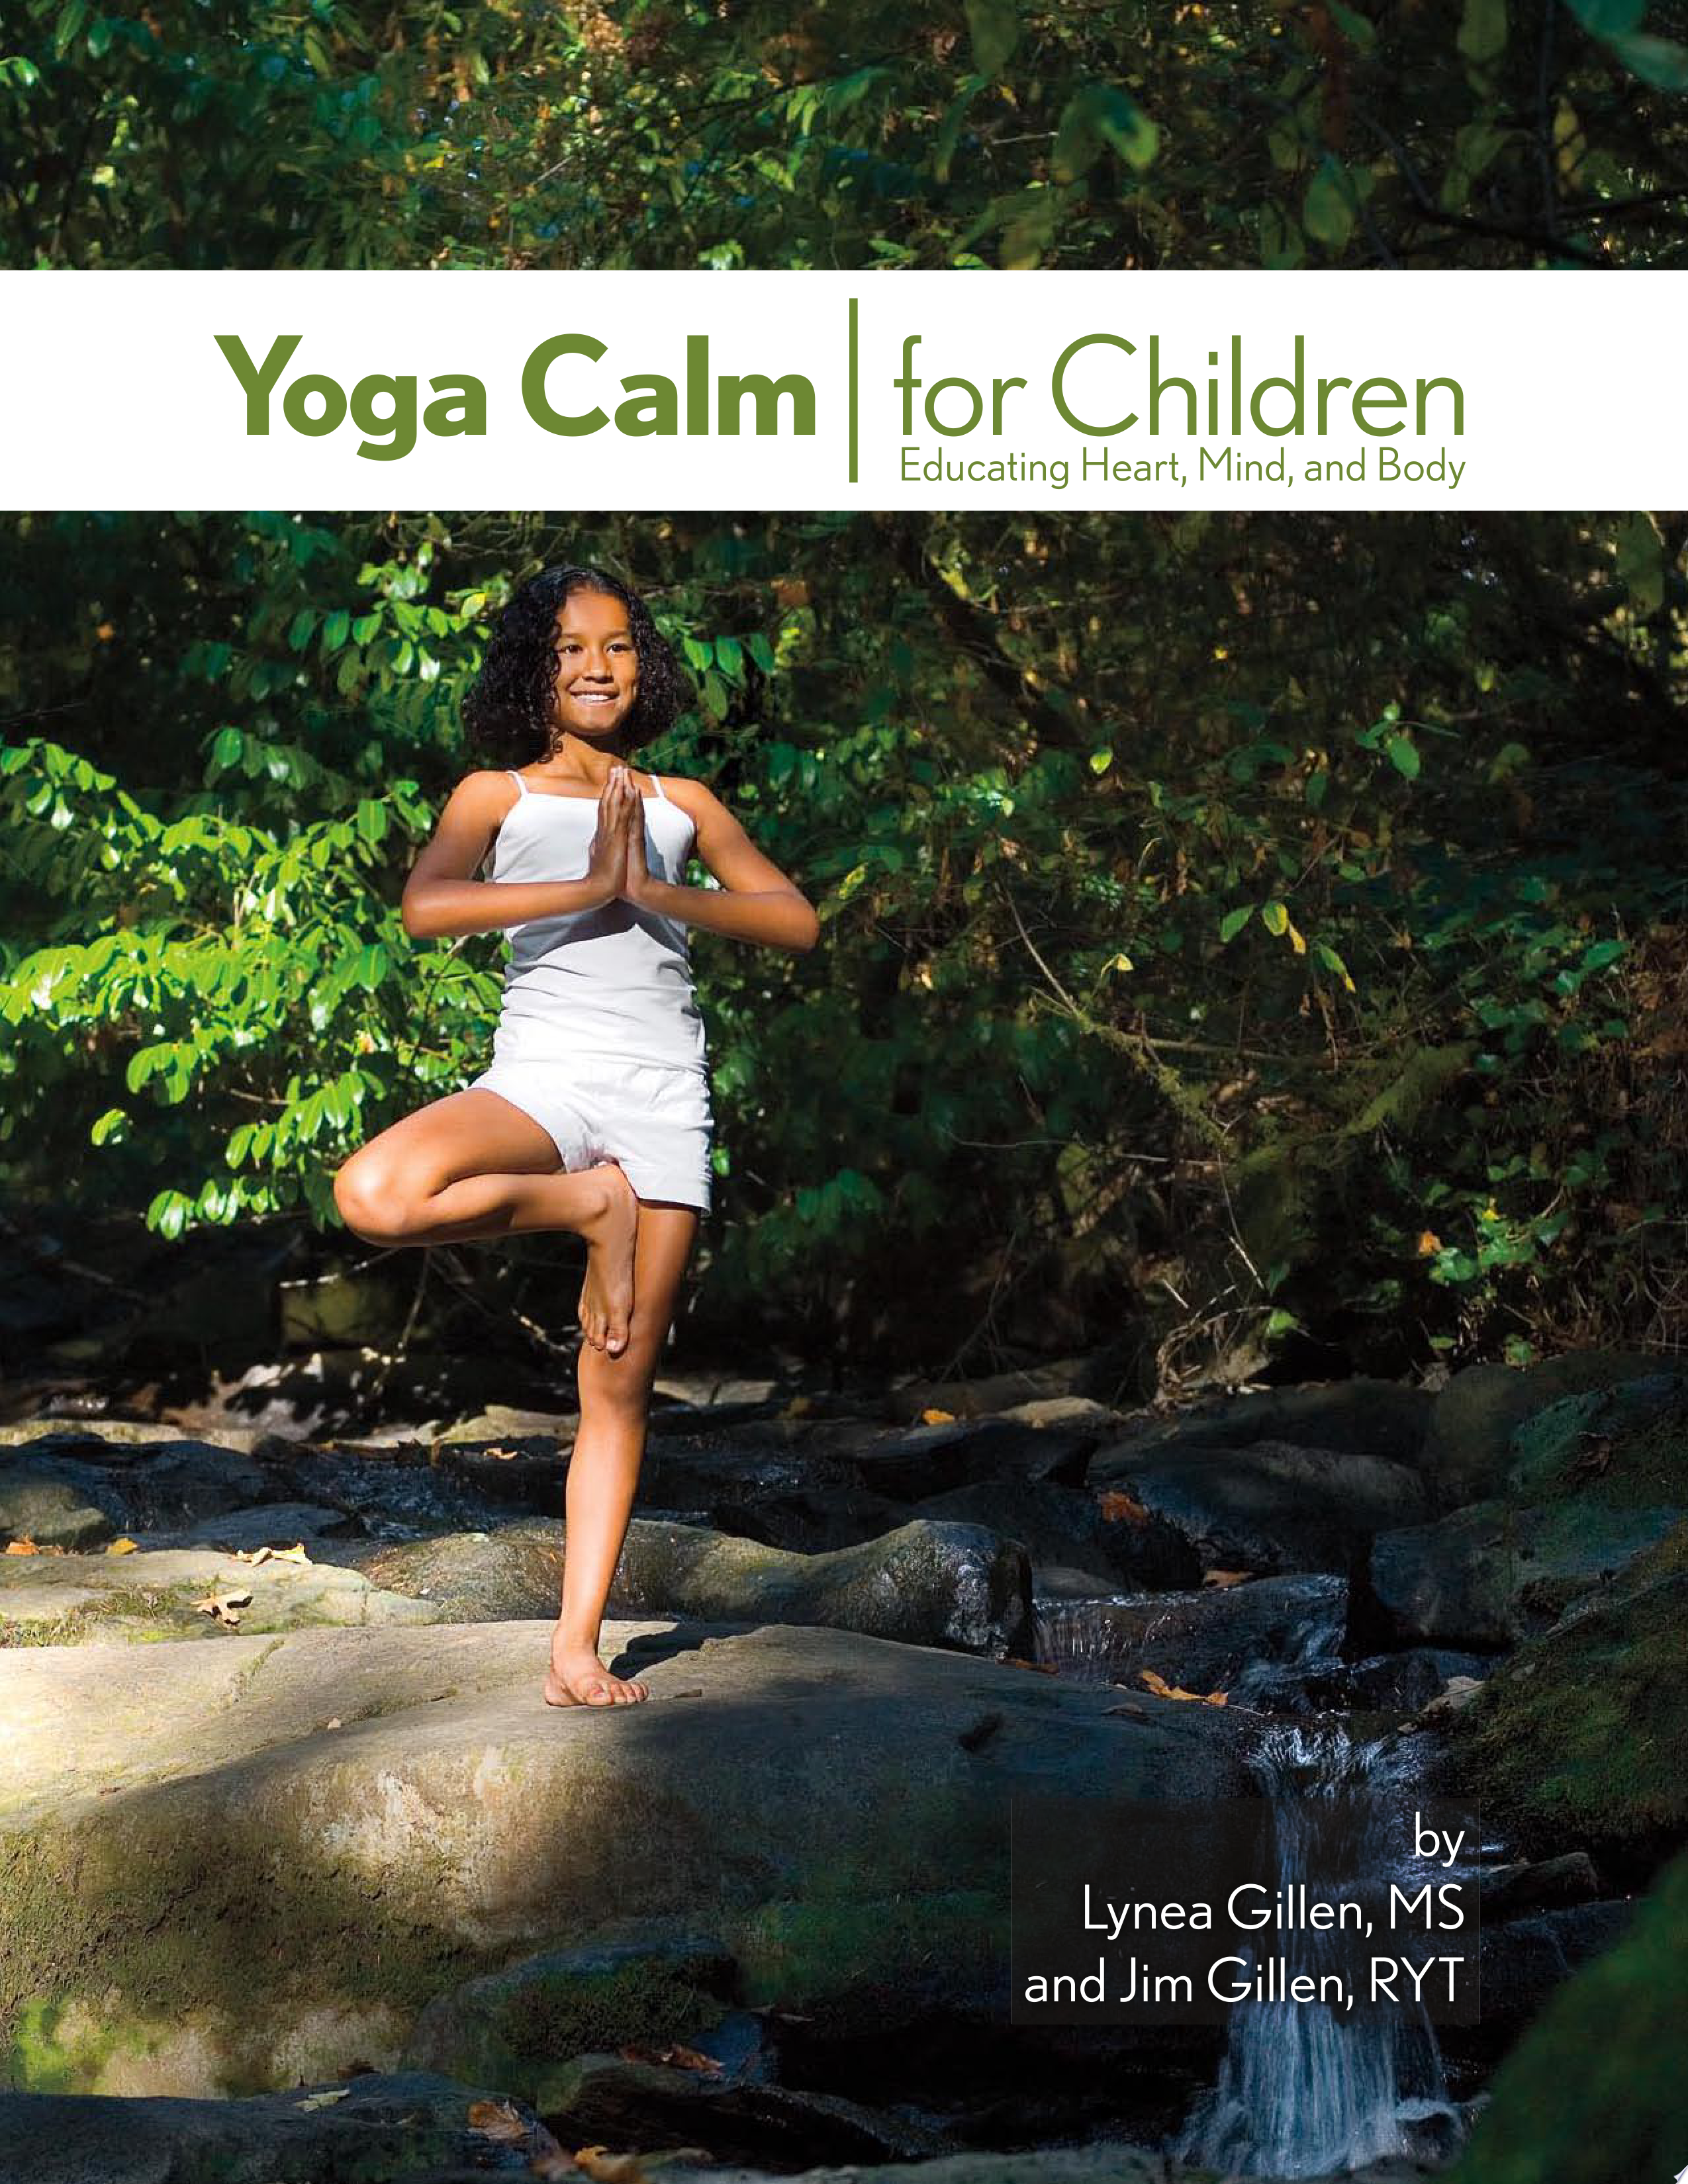 Image for "Yoga Calm for Children: educating heart, mind, and body"